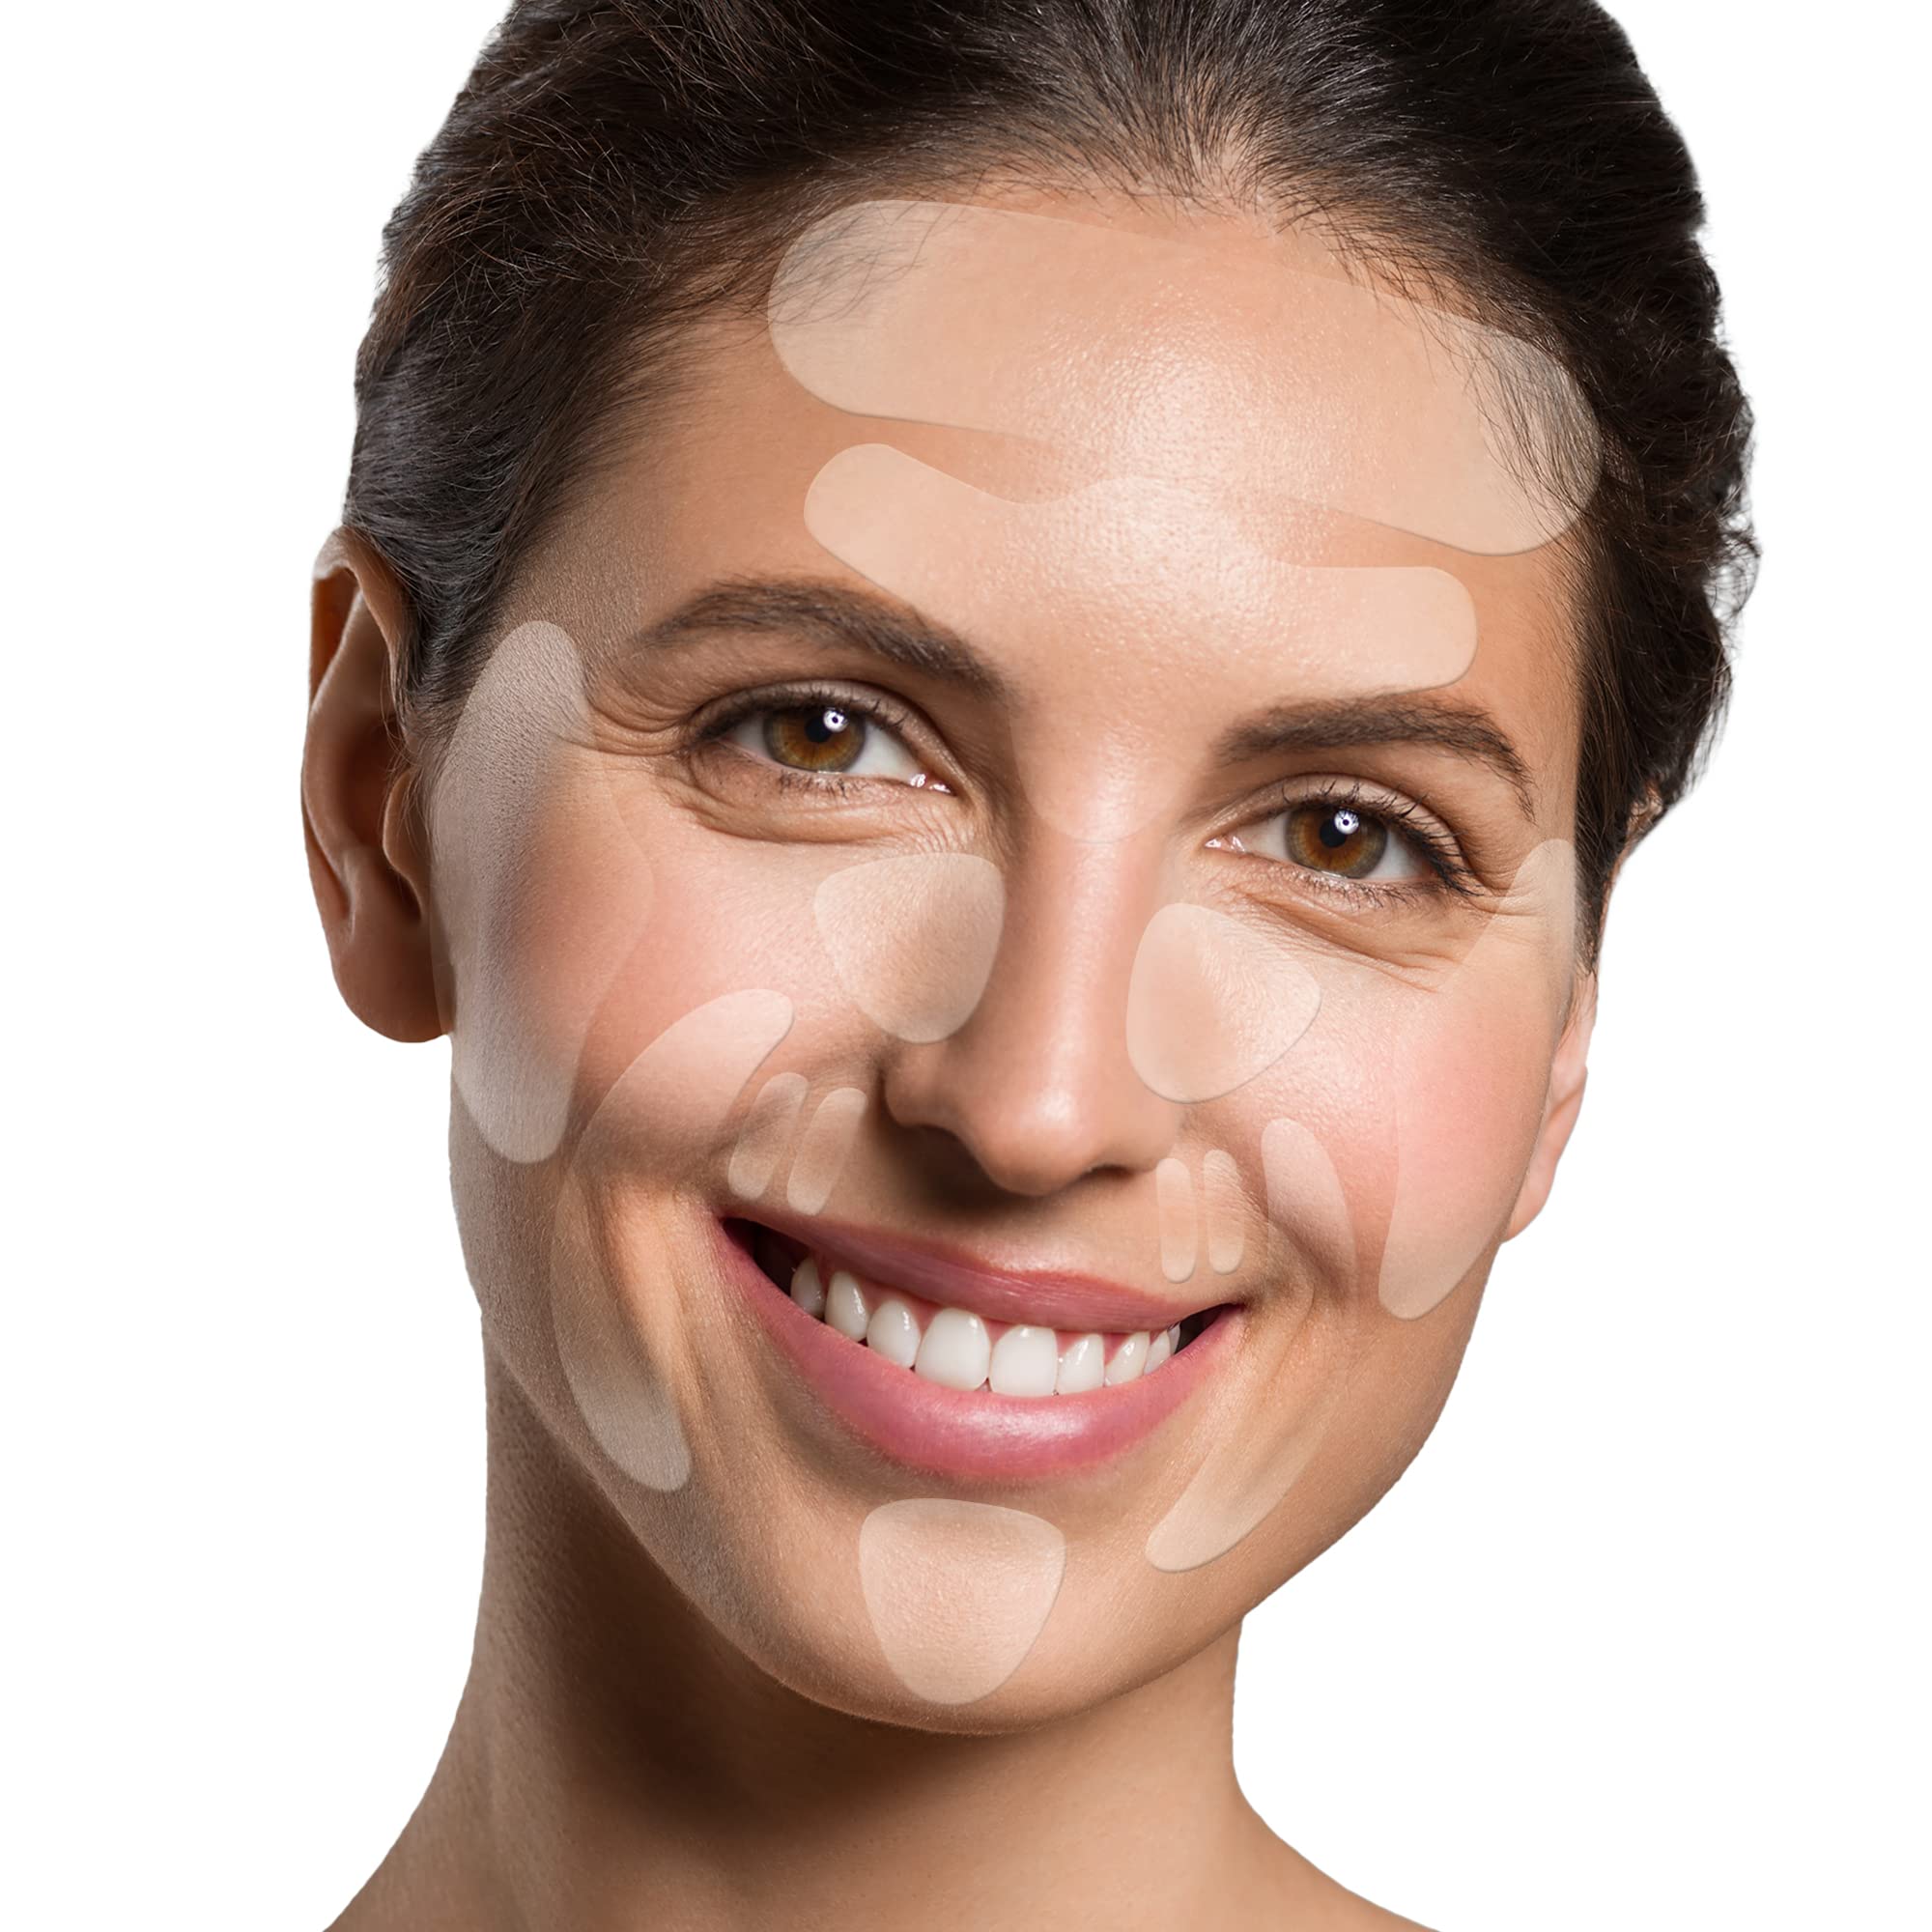 Face Tape for Wrinkles Anti Wrinkle Patches for Face and Forehead